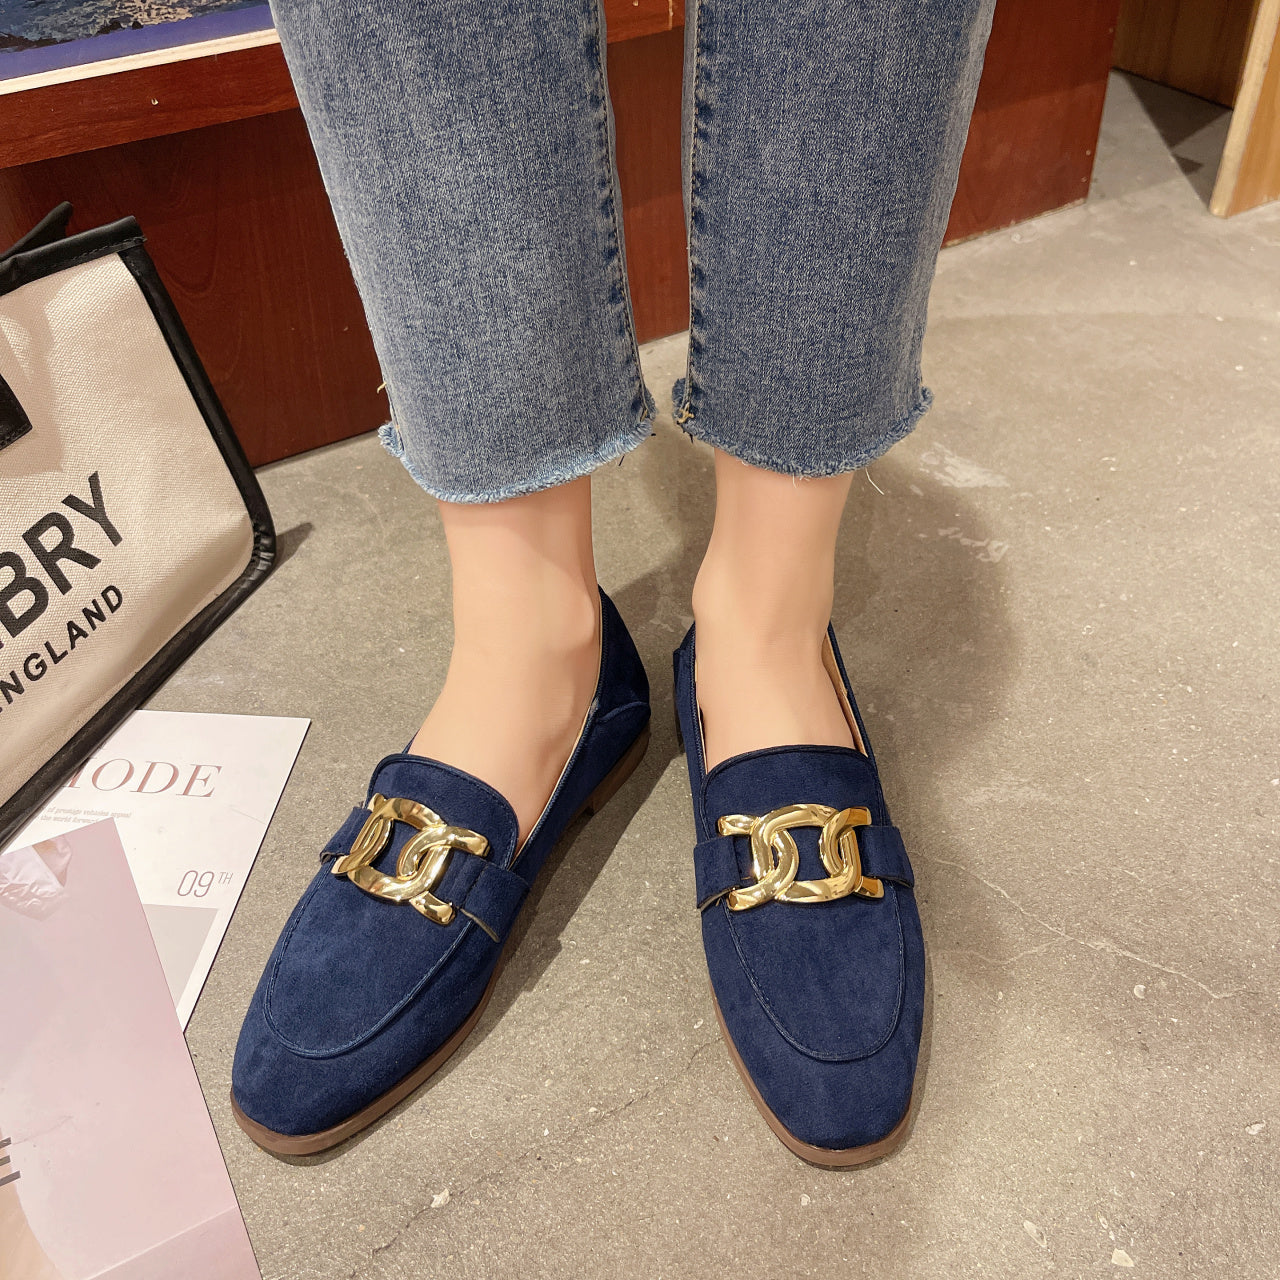 Women's flats Shoes; Casual Loafers For Women Pumps Designer Shoes Flat Shoes Suede Comfort Daily Footwear